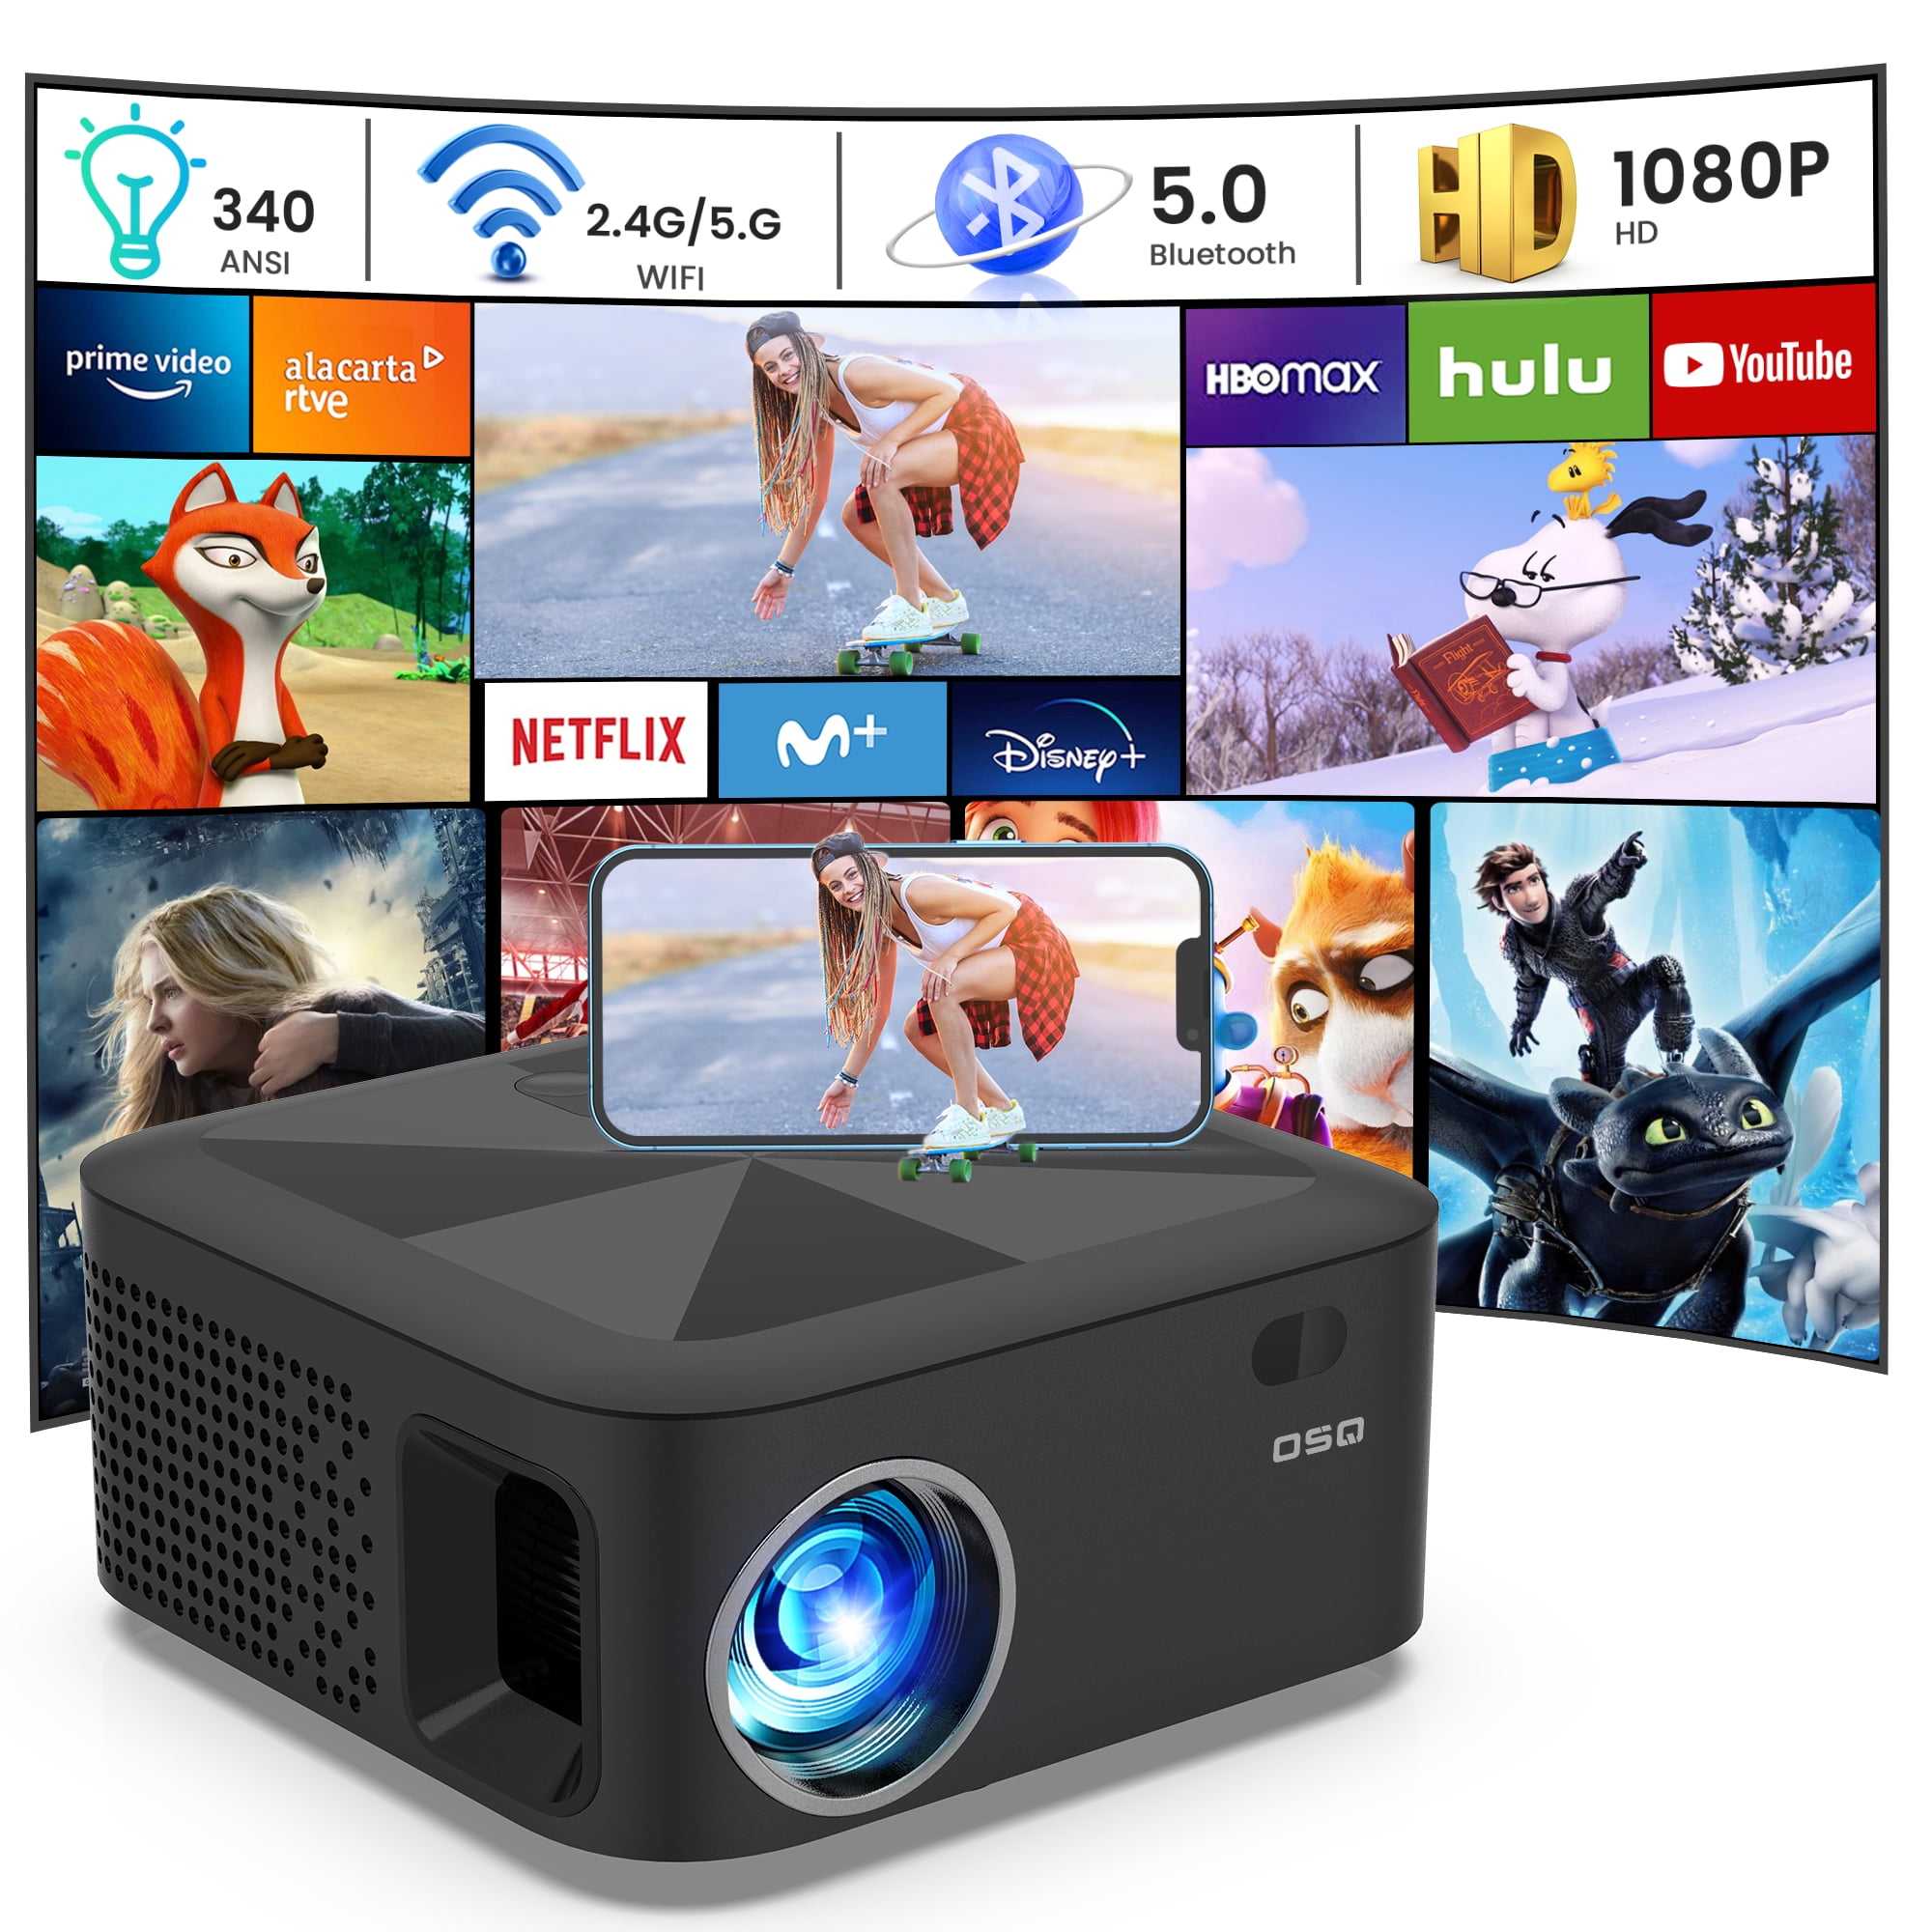 5G WiFi Bluetooth Projector, Full 1080P Supported Outdoor Movie Projector, Home Theater Mini Video Projector with Zoom, Compatible with Phone/Tablet/TV Box/DVD Player/ USB/SD Walmart.com